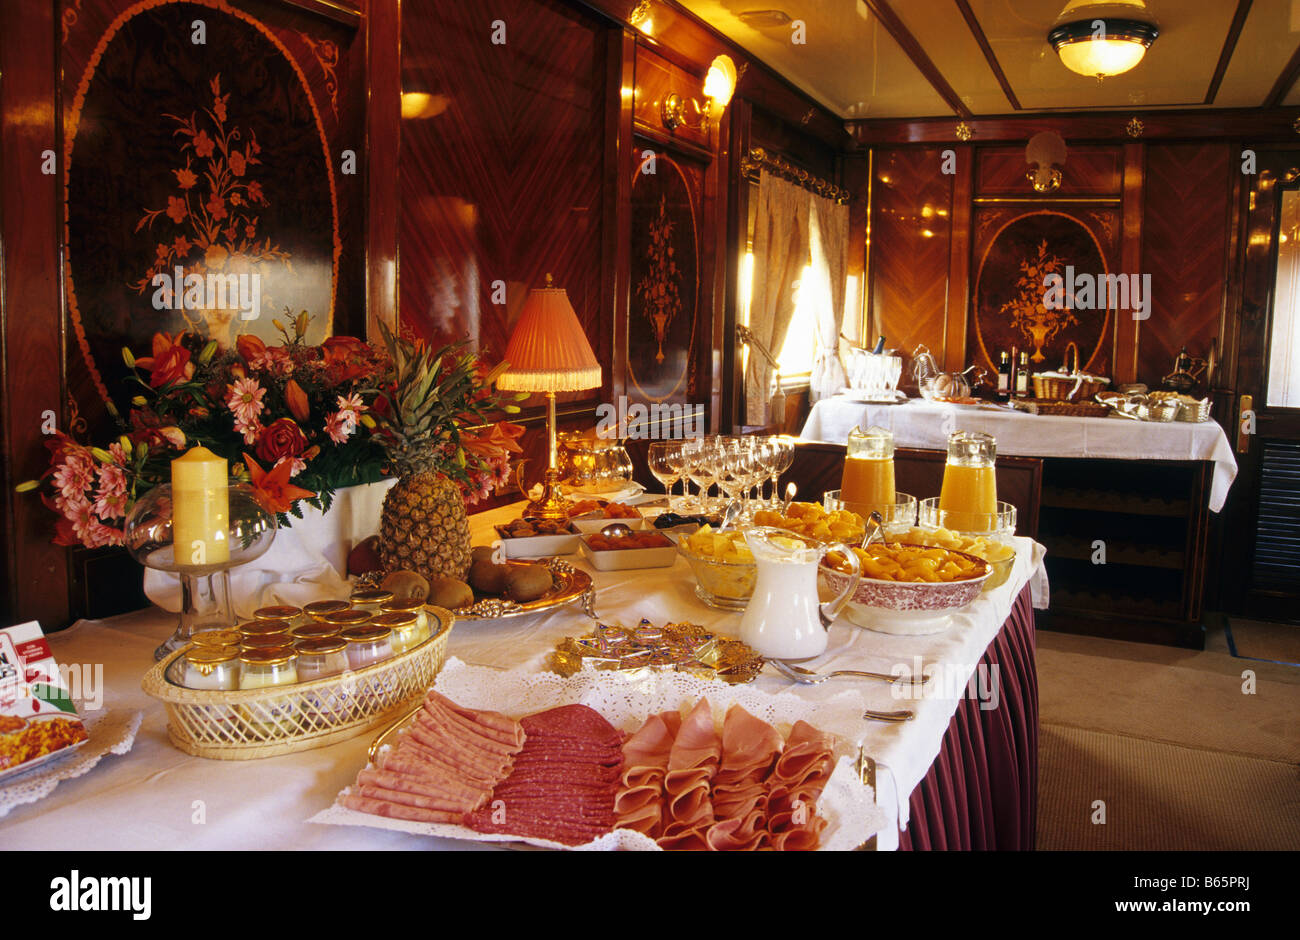 Breakfast in Al Andalus Express Train Andalusia region SPAIN Tren Al Andalus Expreso Stock Photo